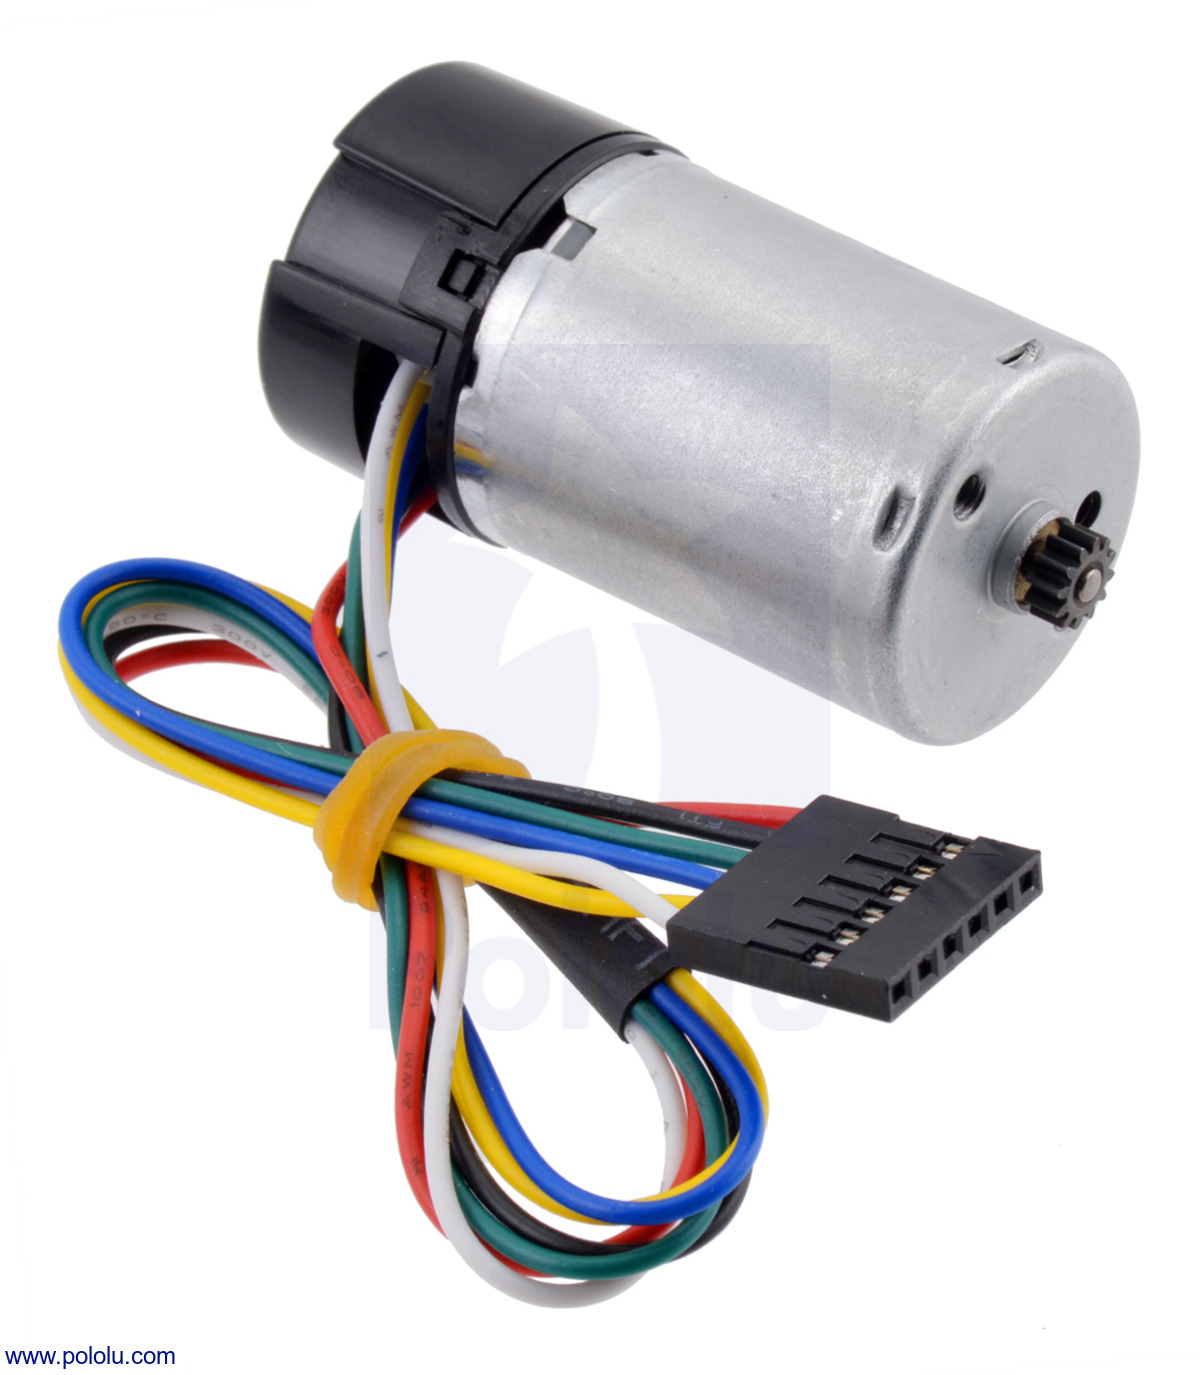 Pololu - MP 12V Motor with 48 CPR Encoder for 25D mm Metal